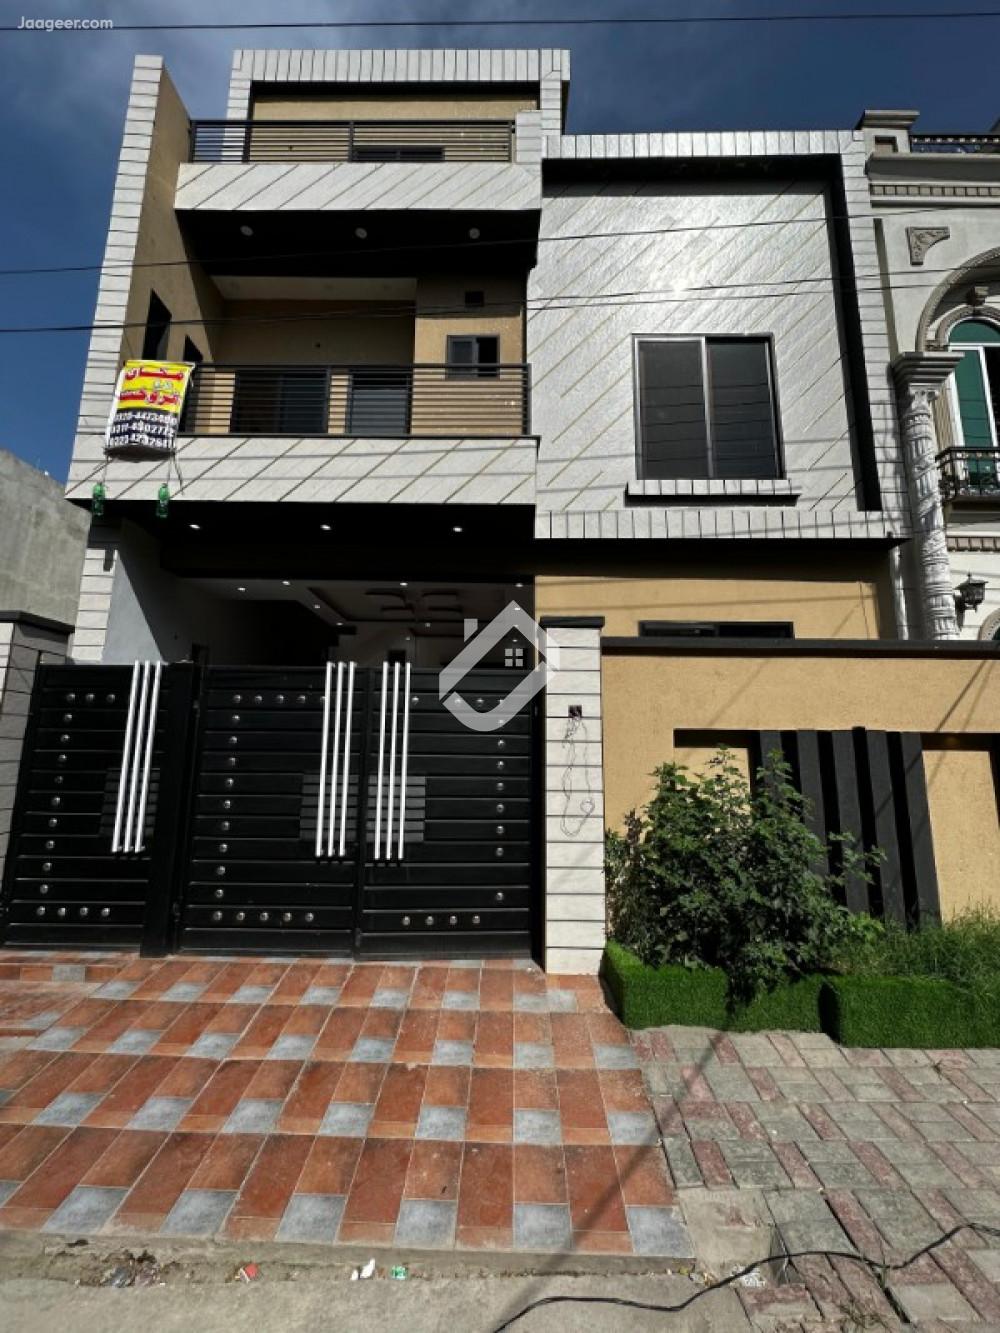 Main image 5 Marla Triple Storey Stunning House For Sale In Al Rehman Garden Phase 2  House No :858-C